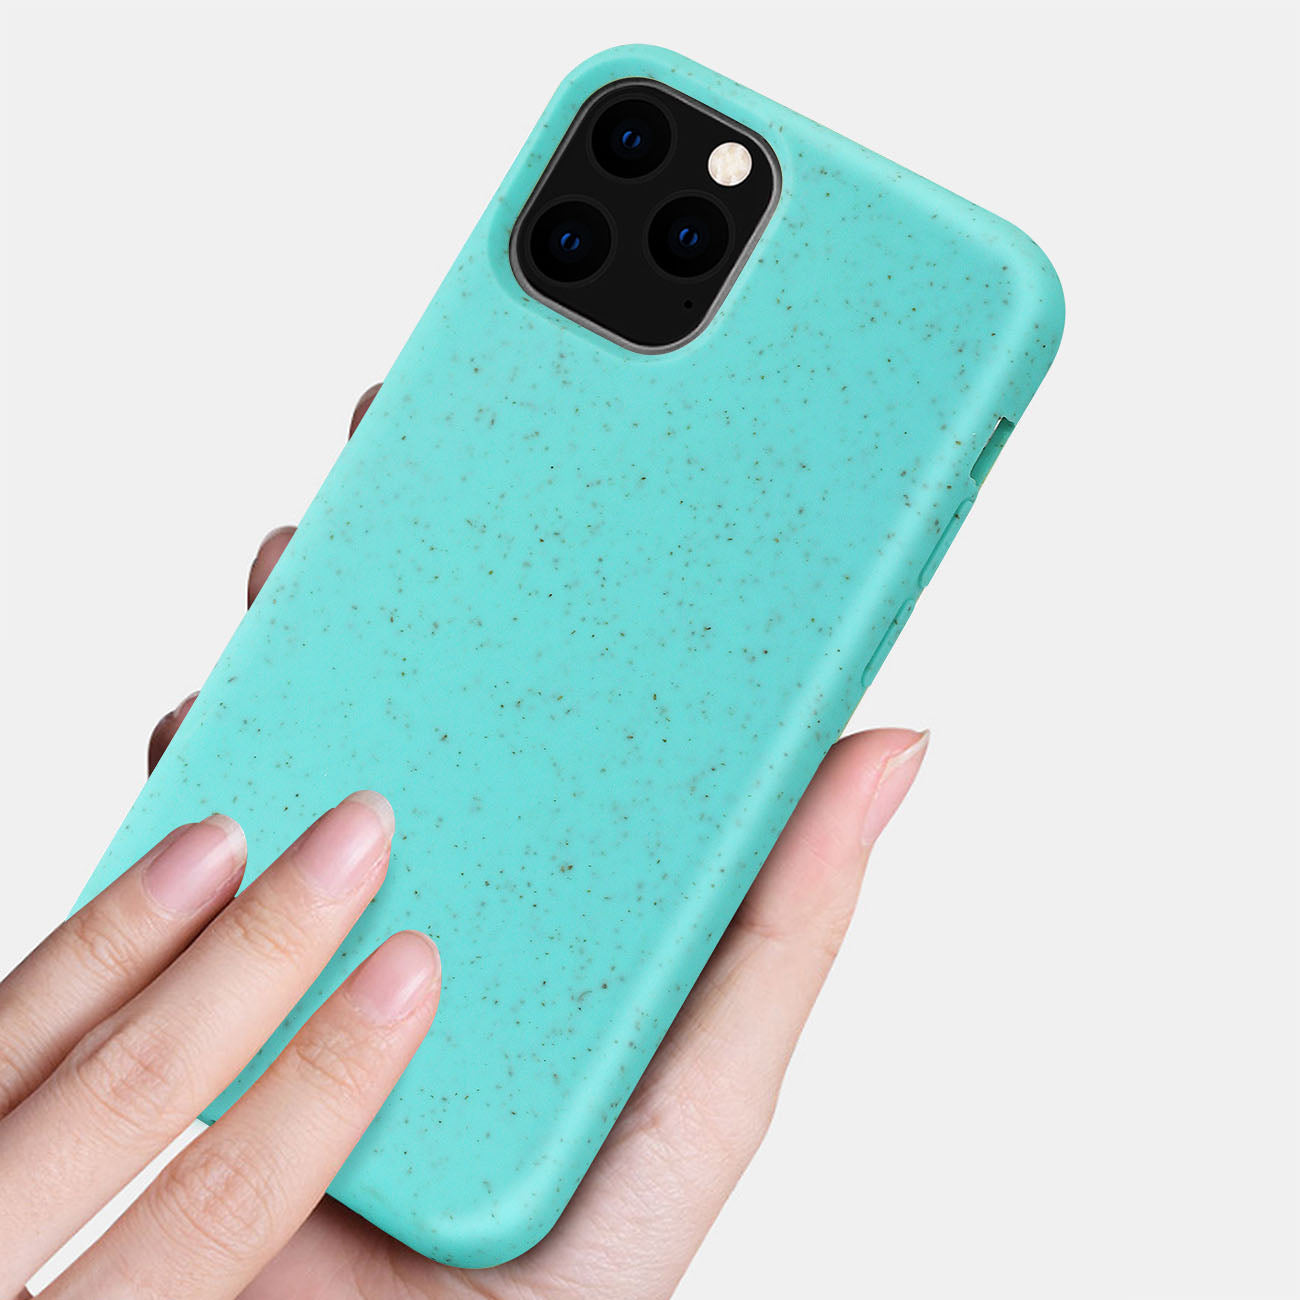 APPLE IPHONE 11 PRO MAX Wheat Bran Material Silicone Phone Case In Blue